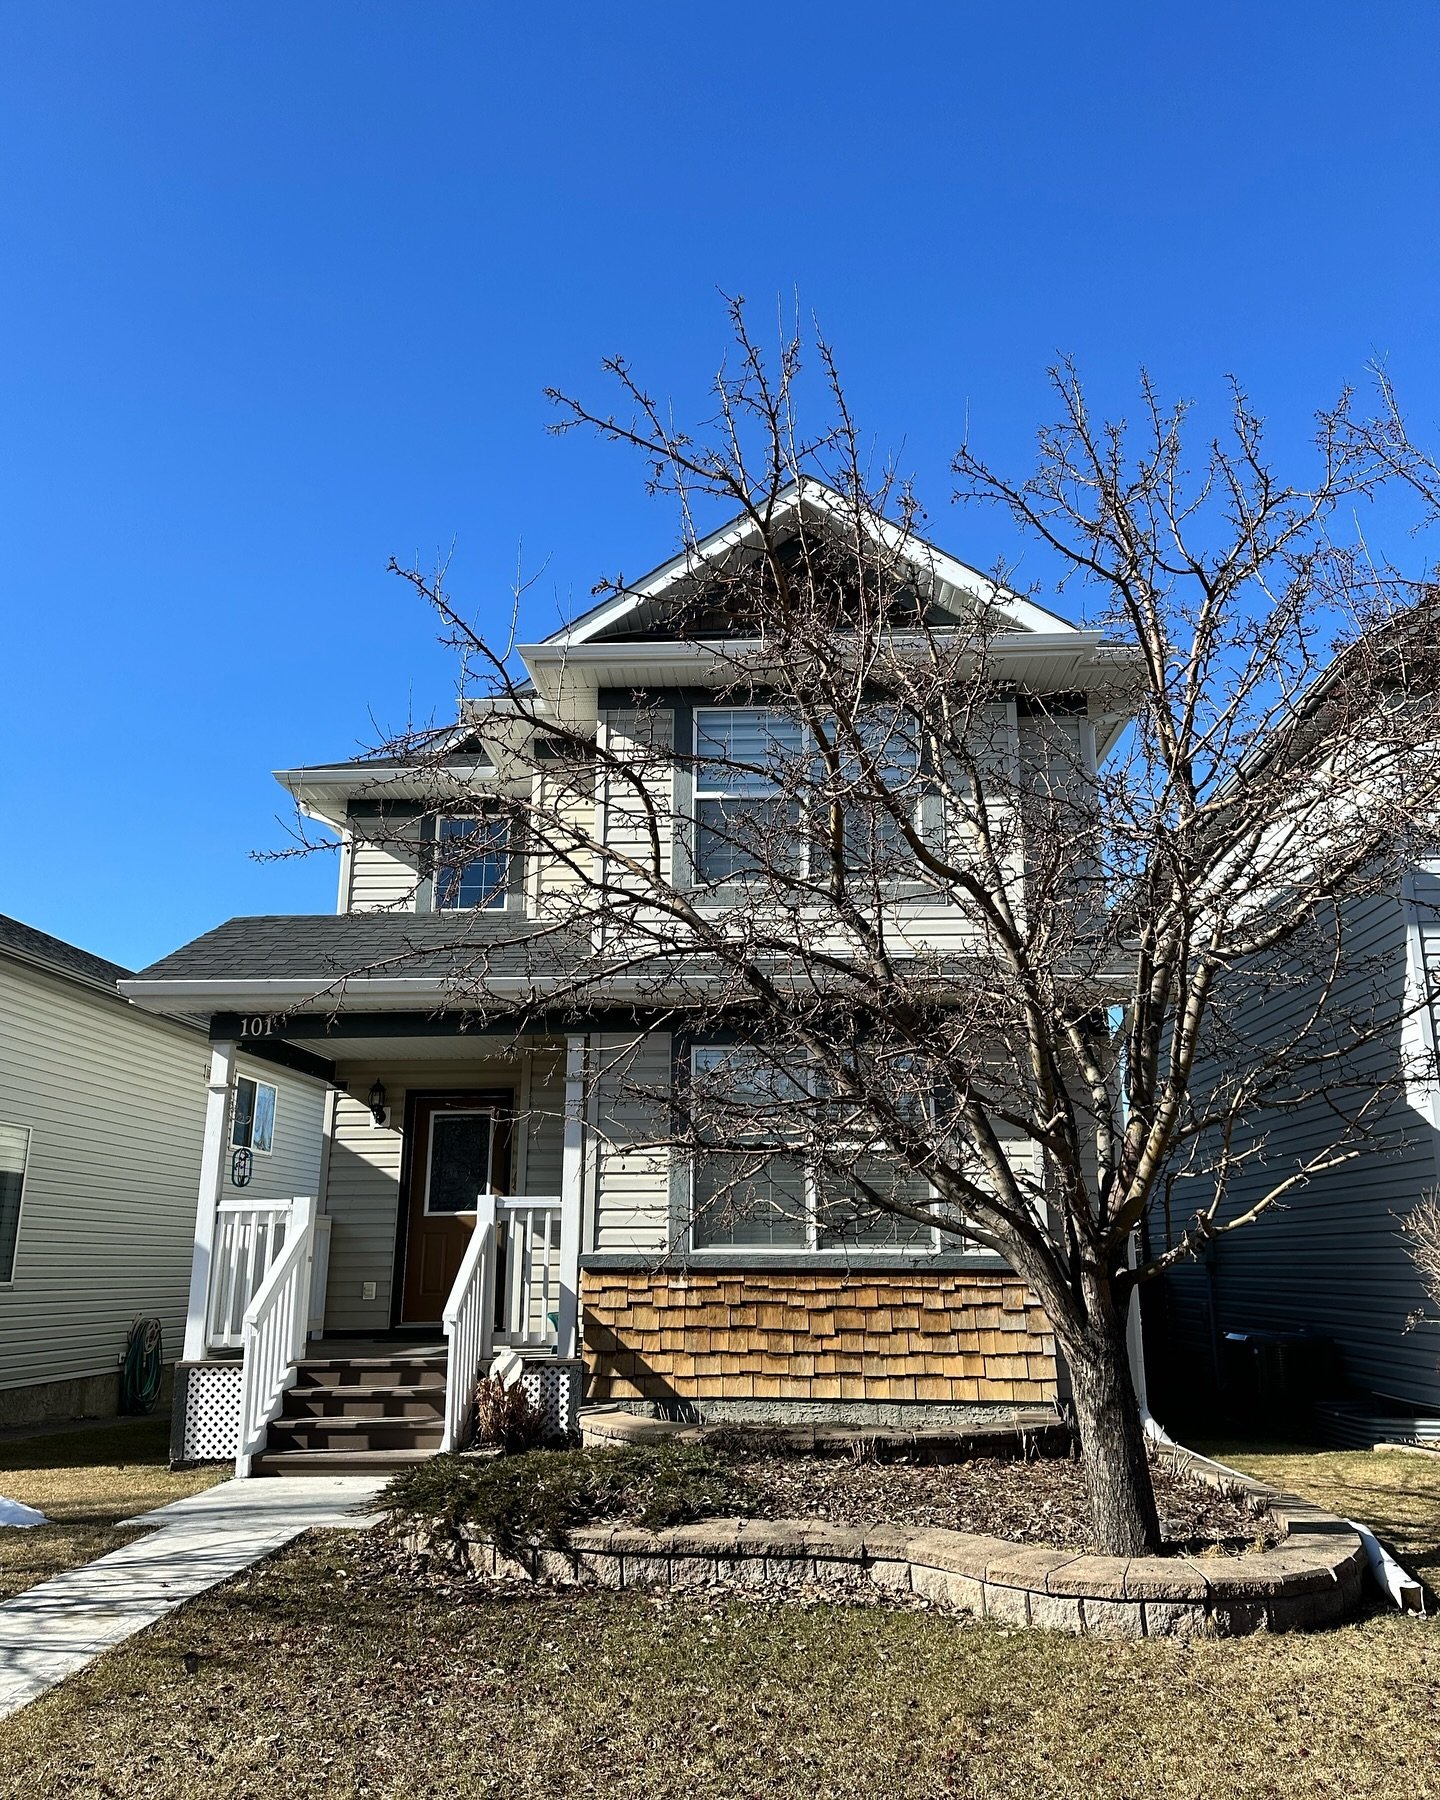 What a beautiful morning to visit Coventry!

Great staging consultation in this house that offers 3 bedrooms and a fully finished basement! I was surprised by the size inside.

This lovely couple is getting ready for some new adventures and so it is 